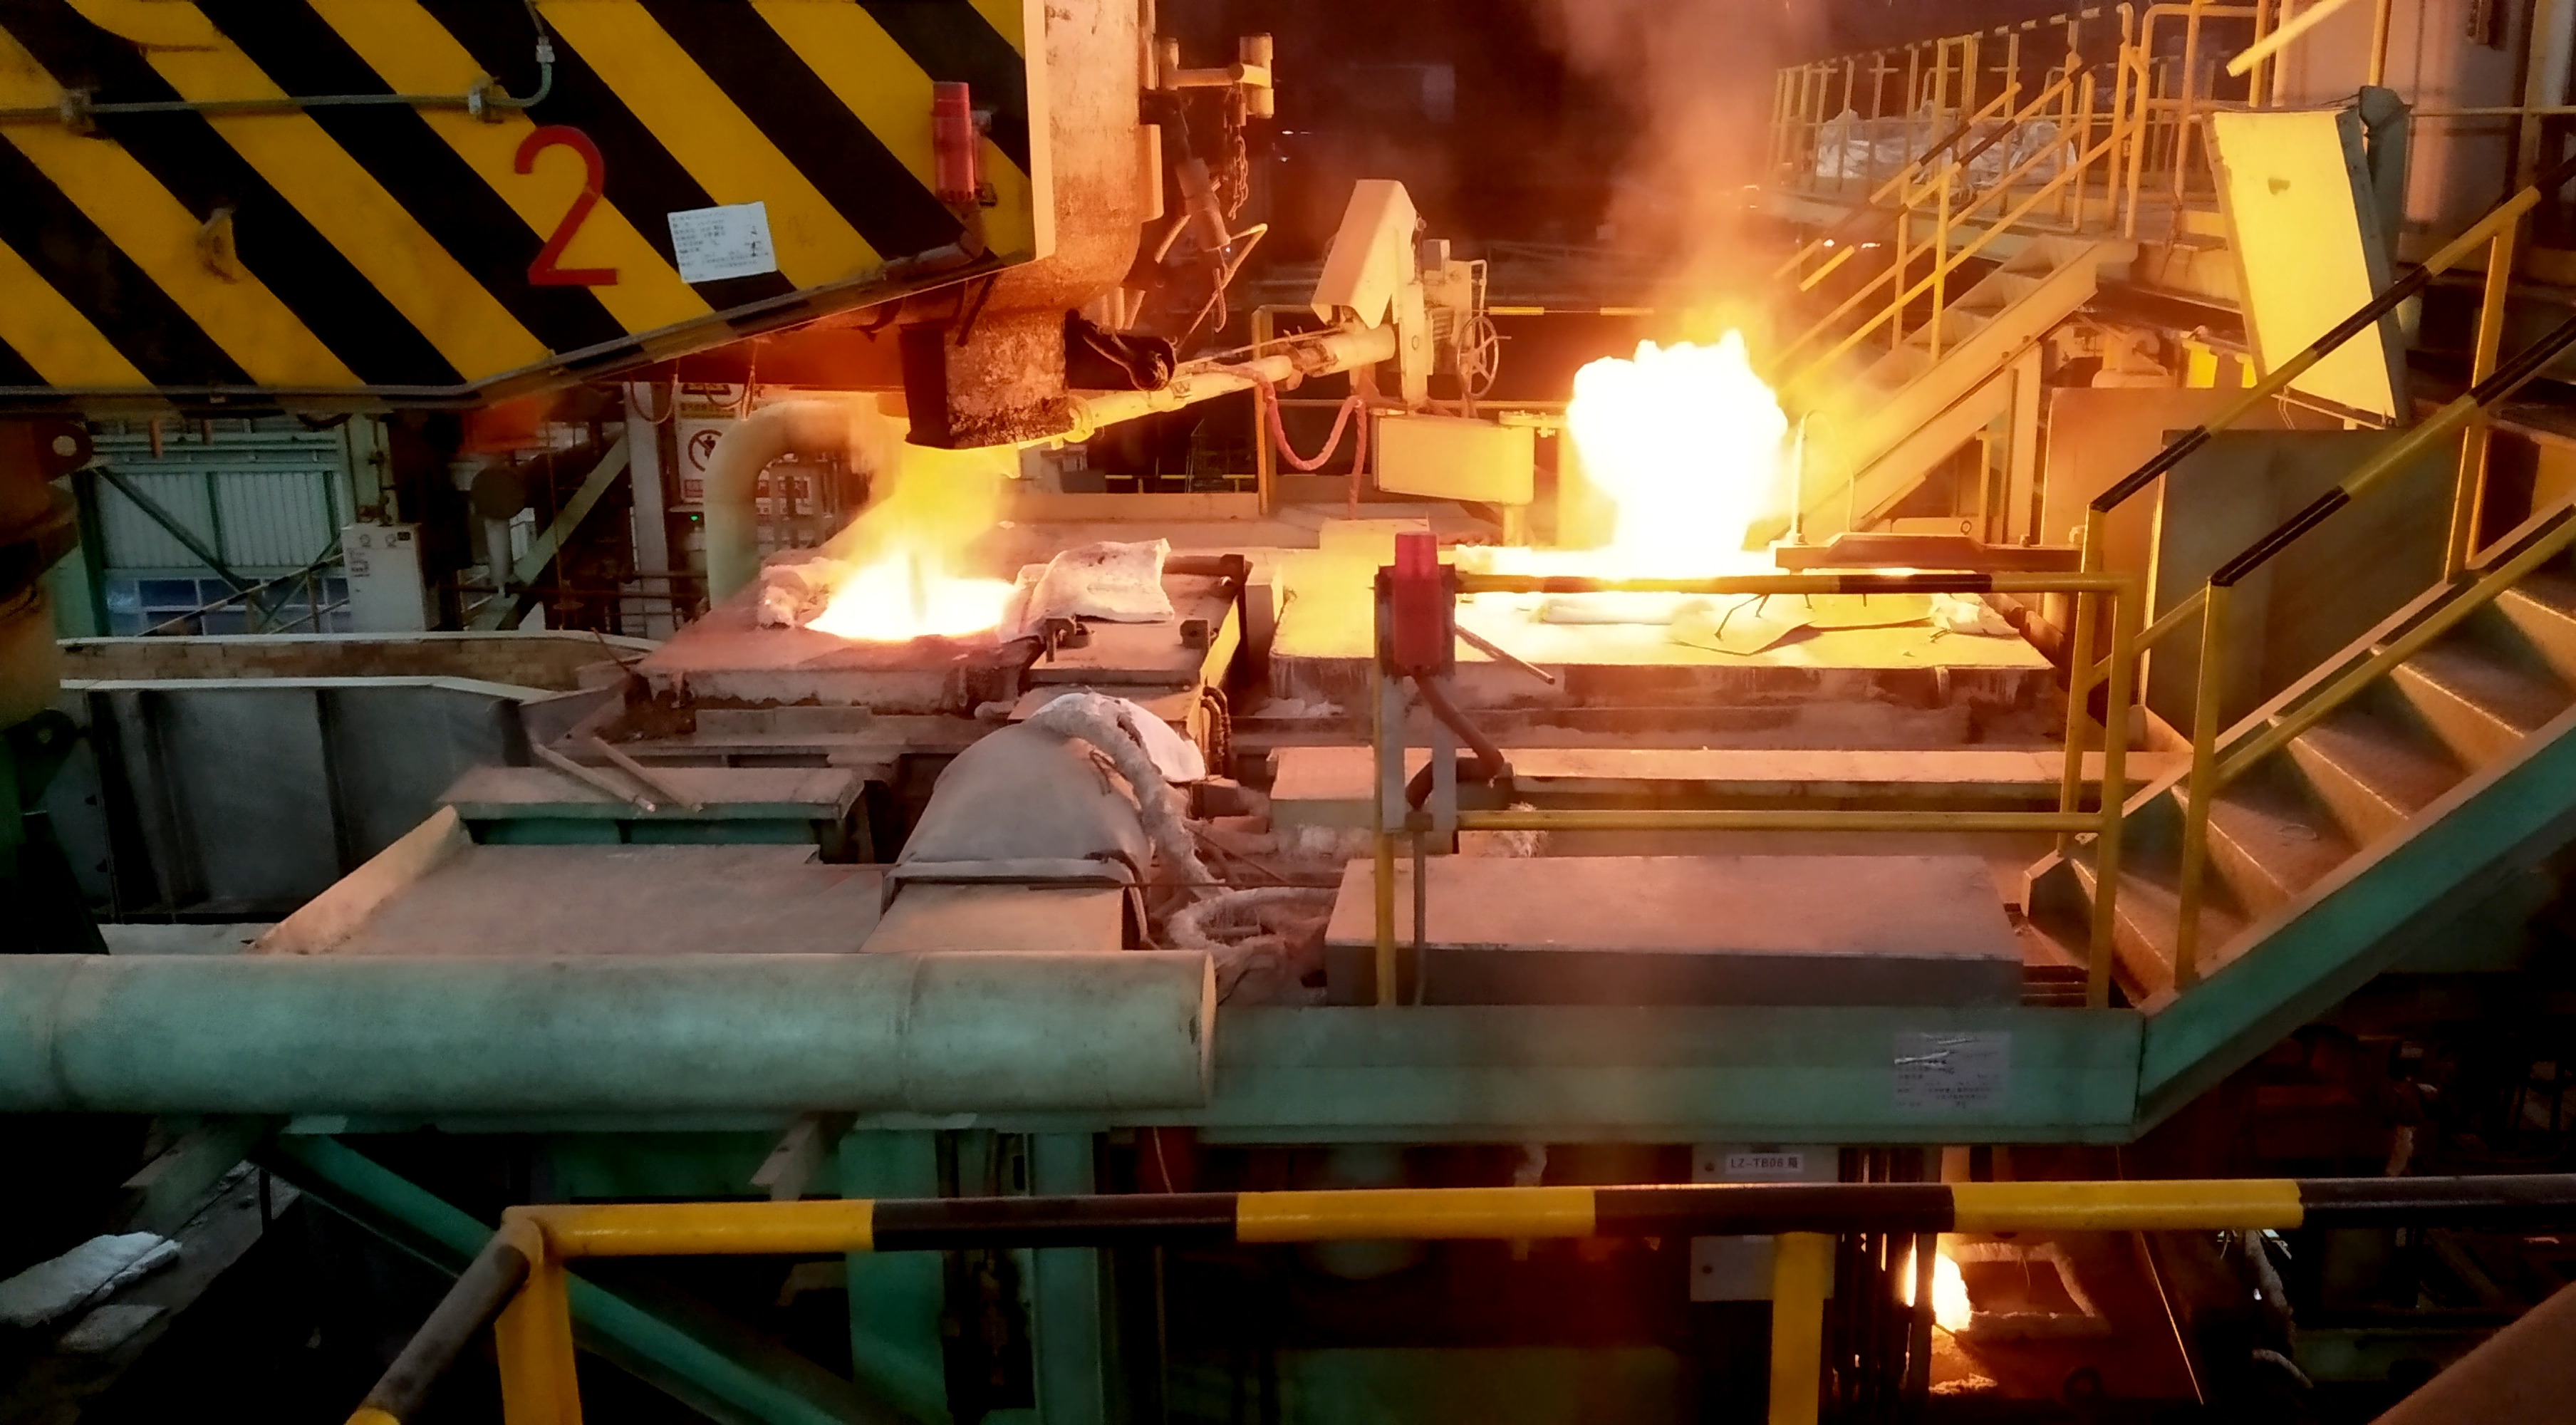 Tundish Induction Heating System for Continuous Constant Temperature Casting in Steelmaking